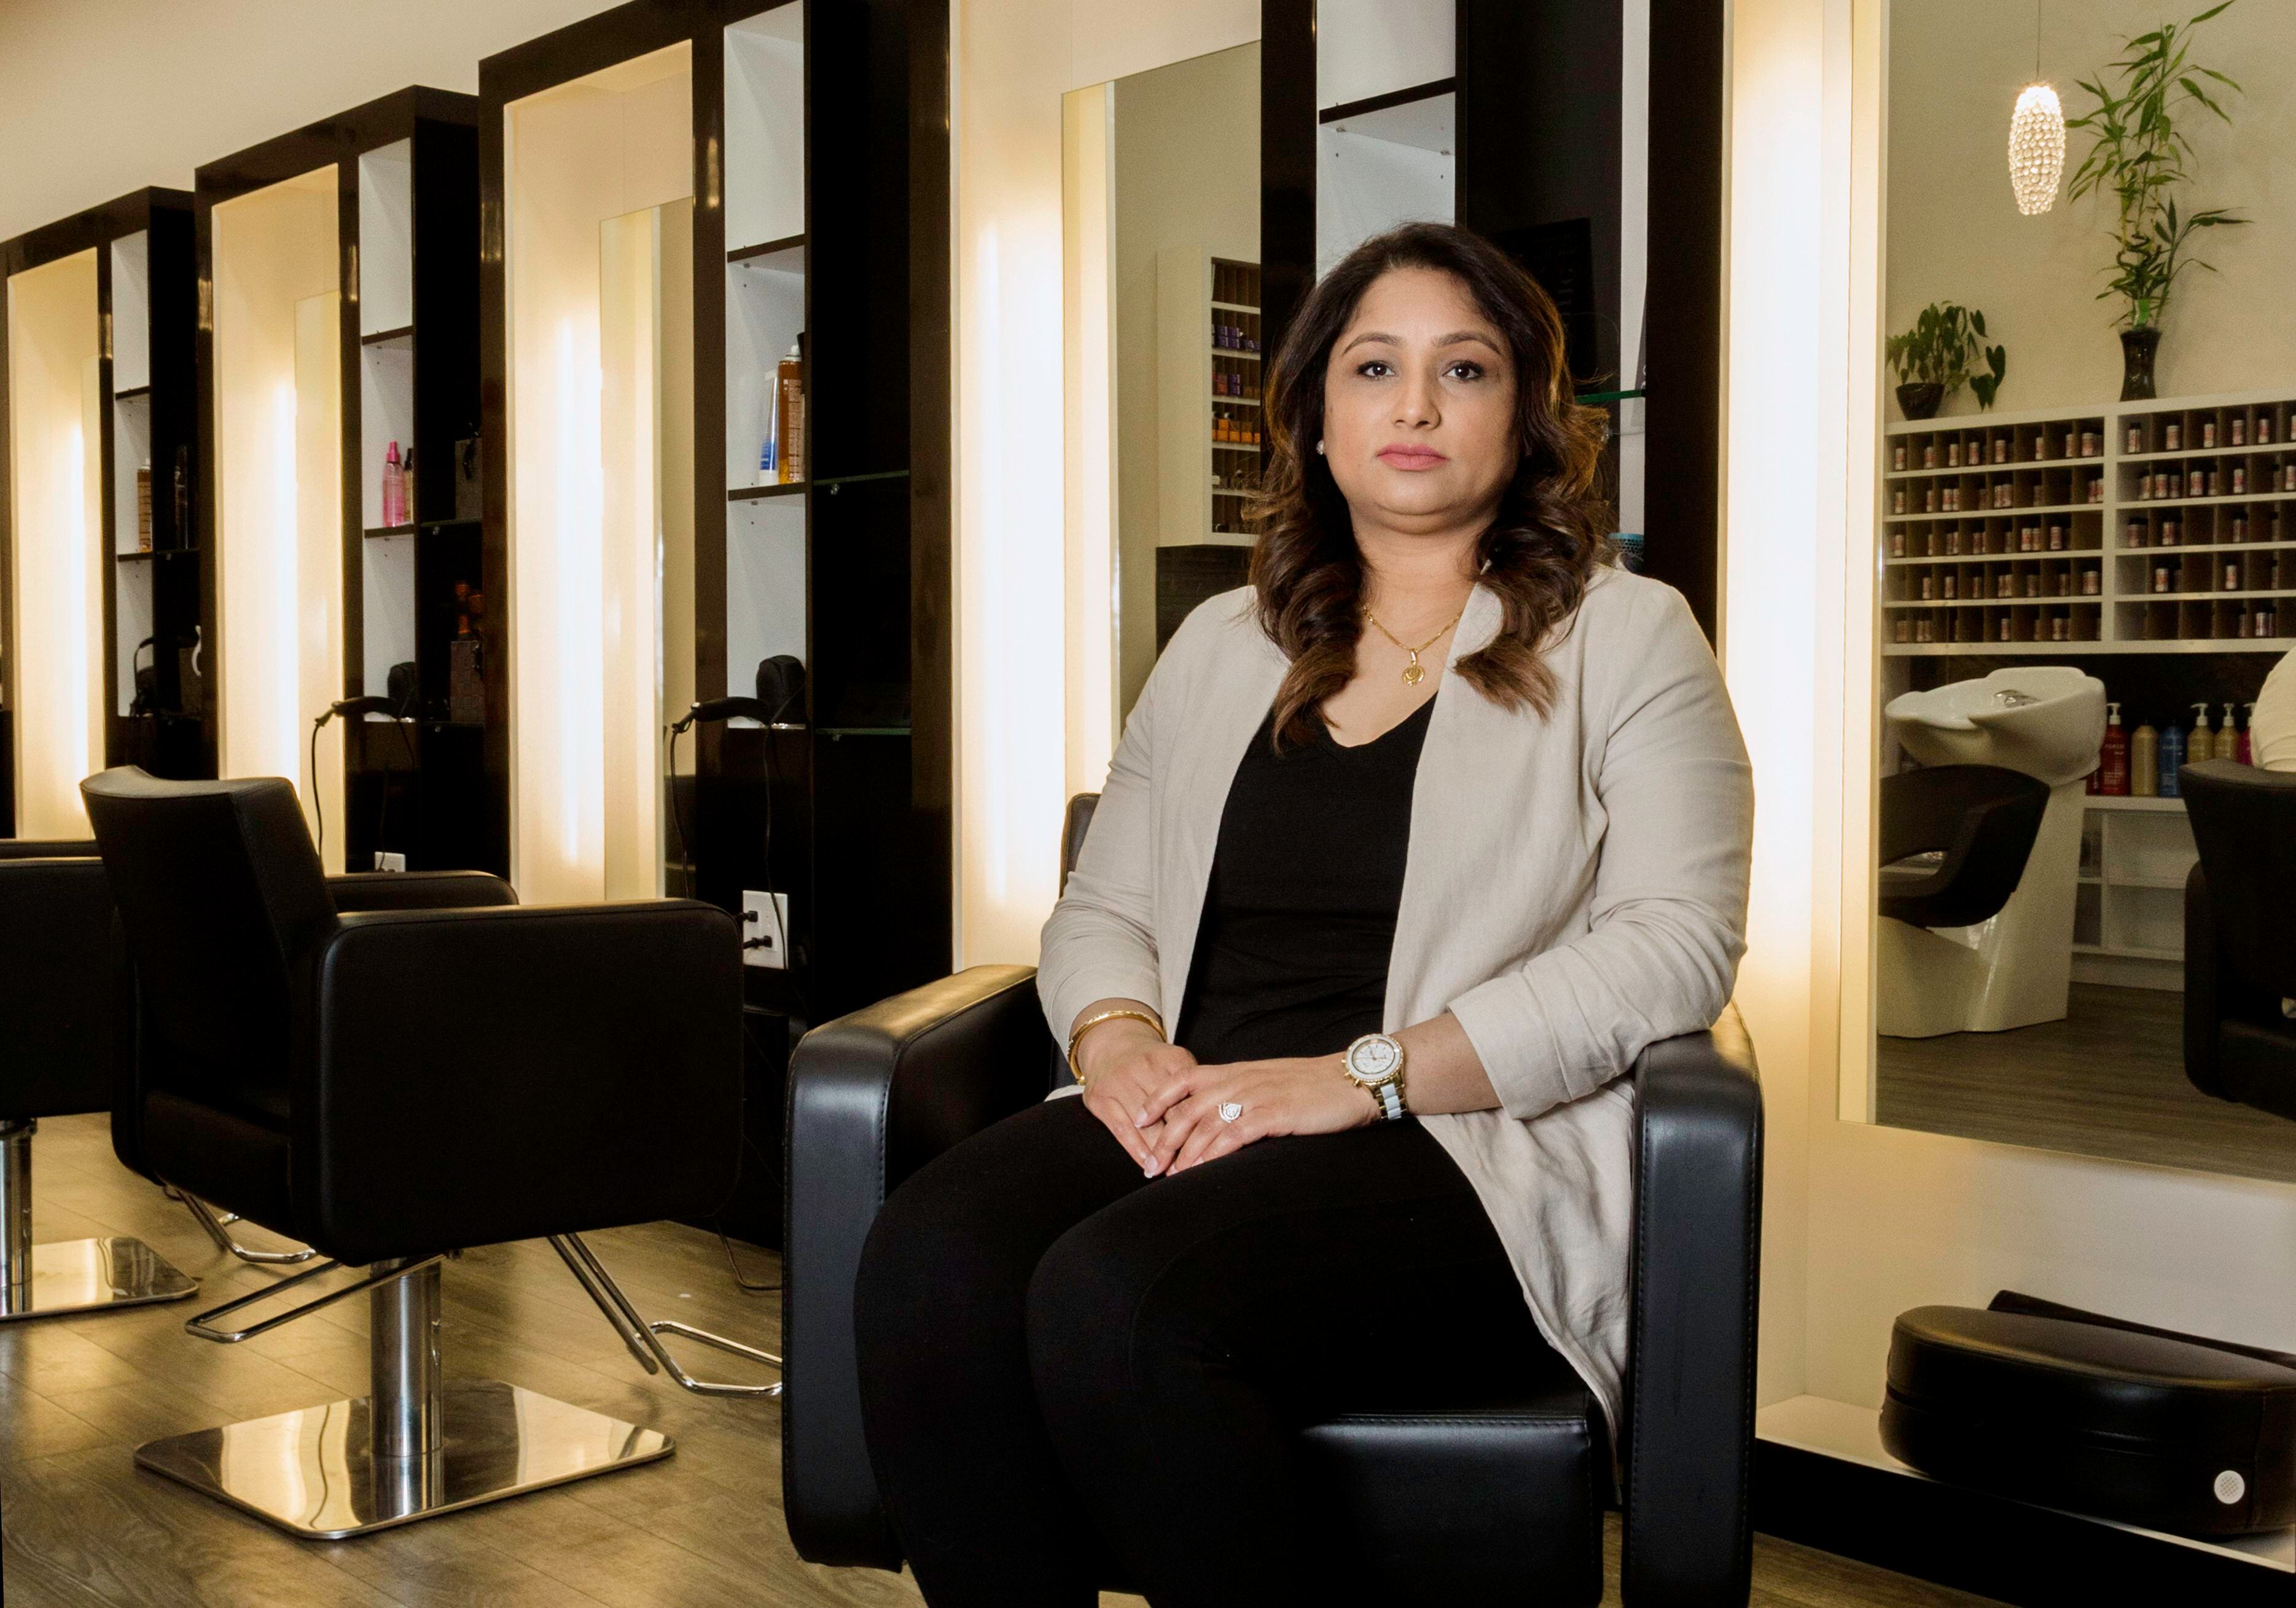 As beauty businesses stay shuttered, Brampton salon owners face losing  clients to the underground economy - The Globe and Mail